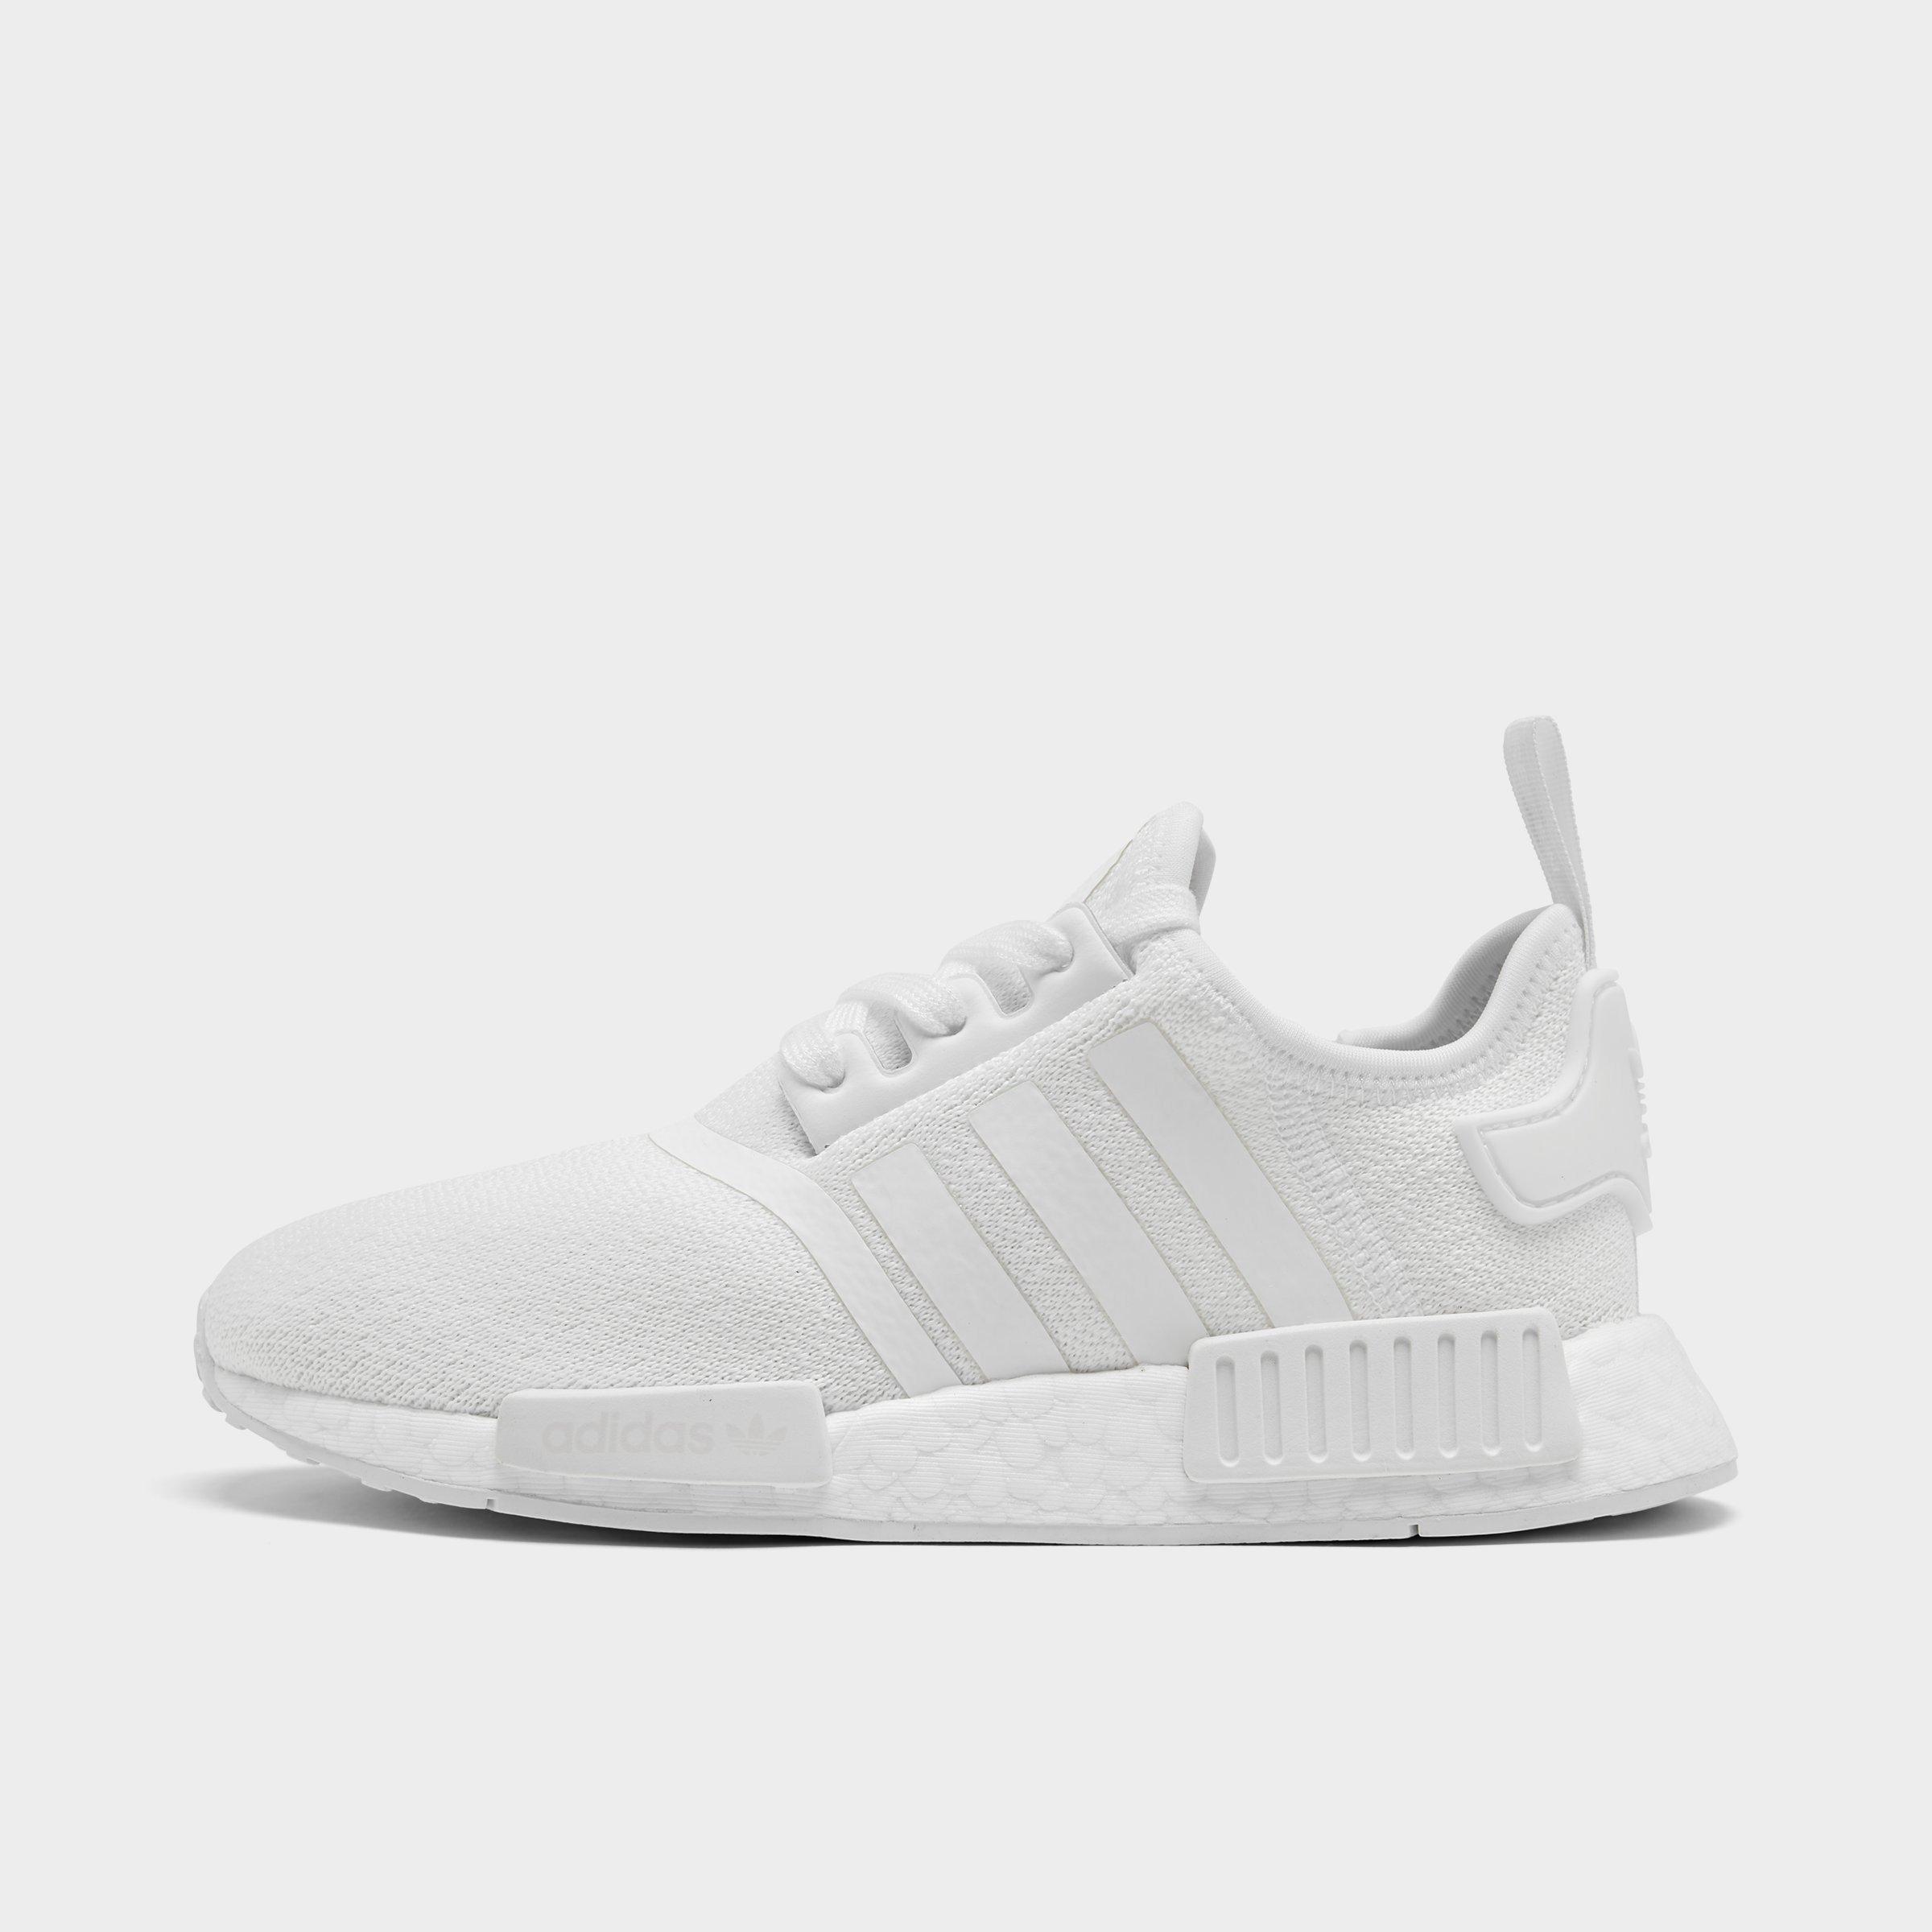 adidas nmd youth size 5